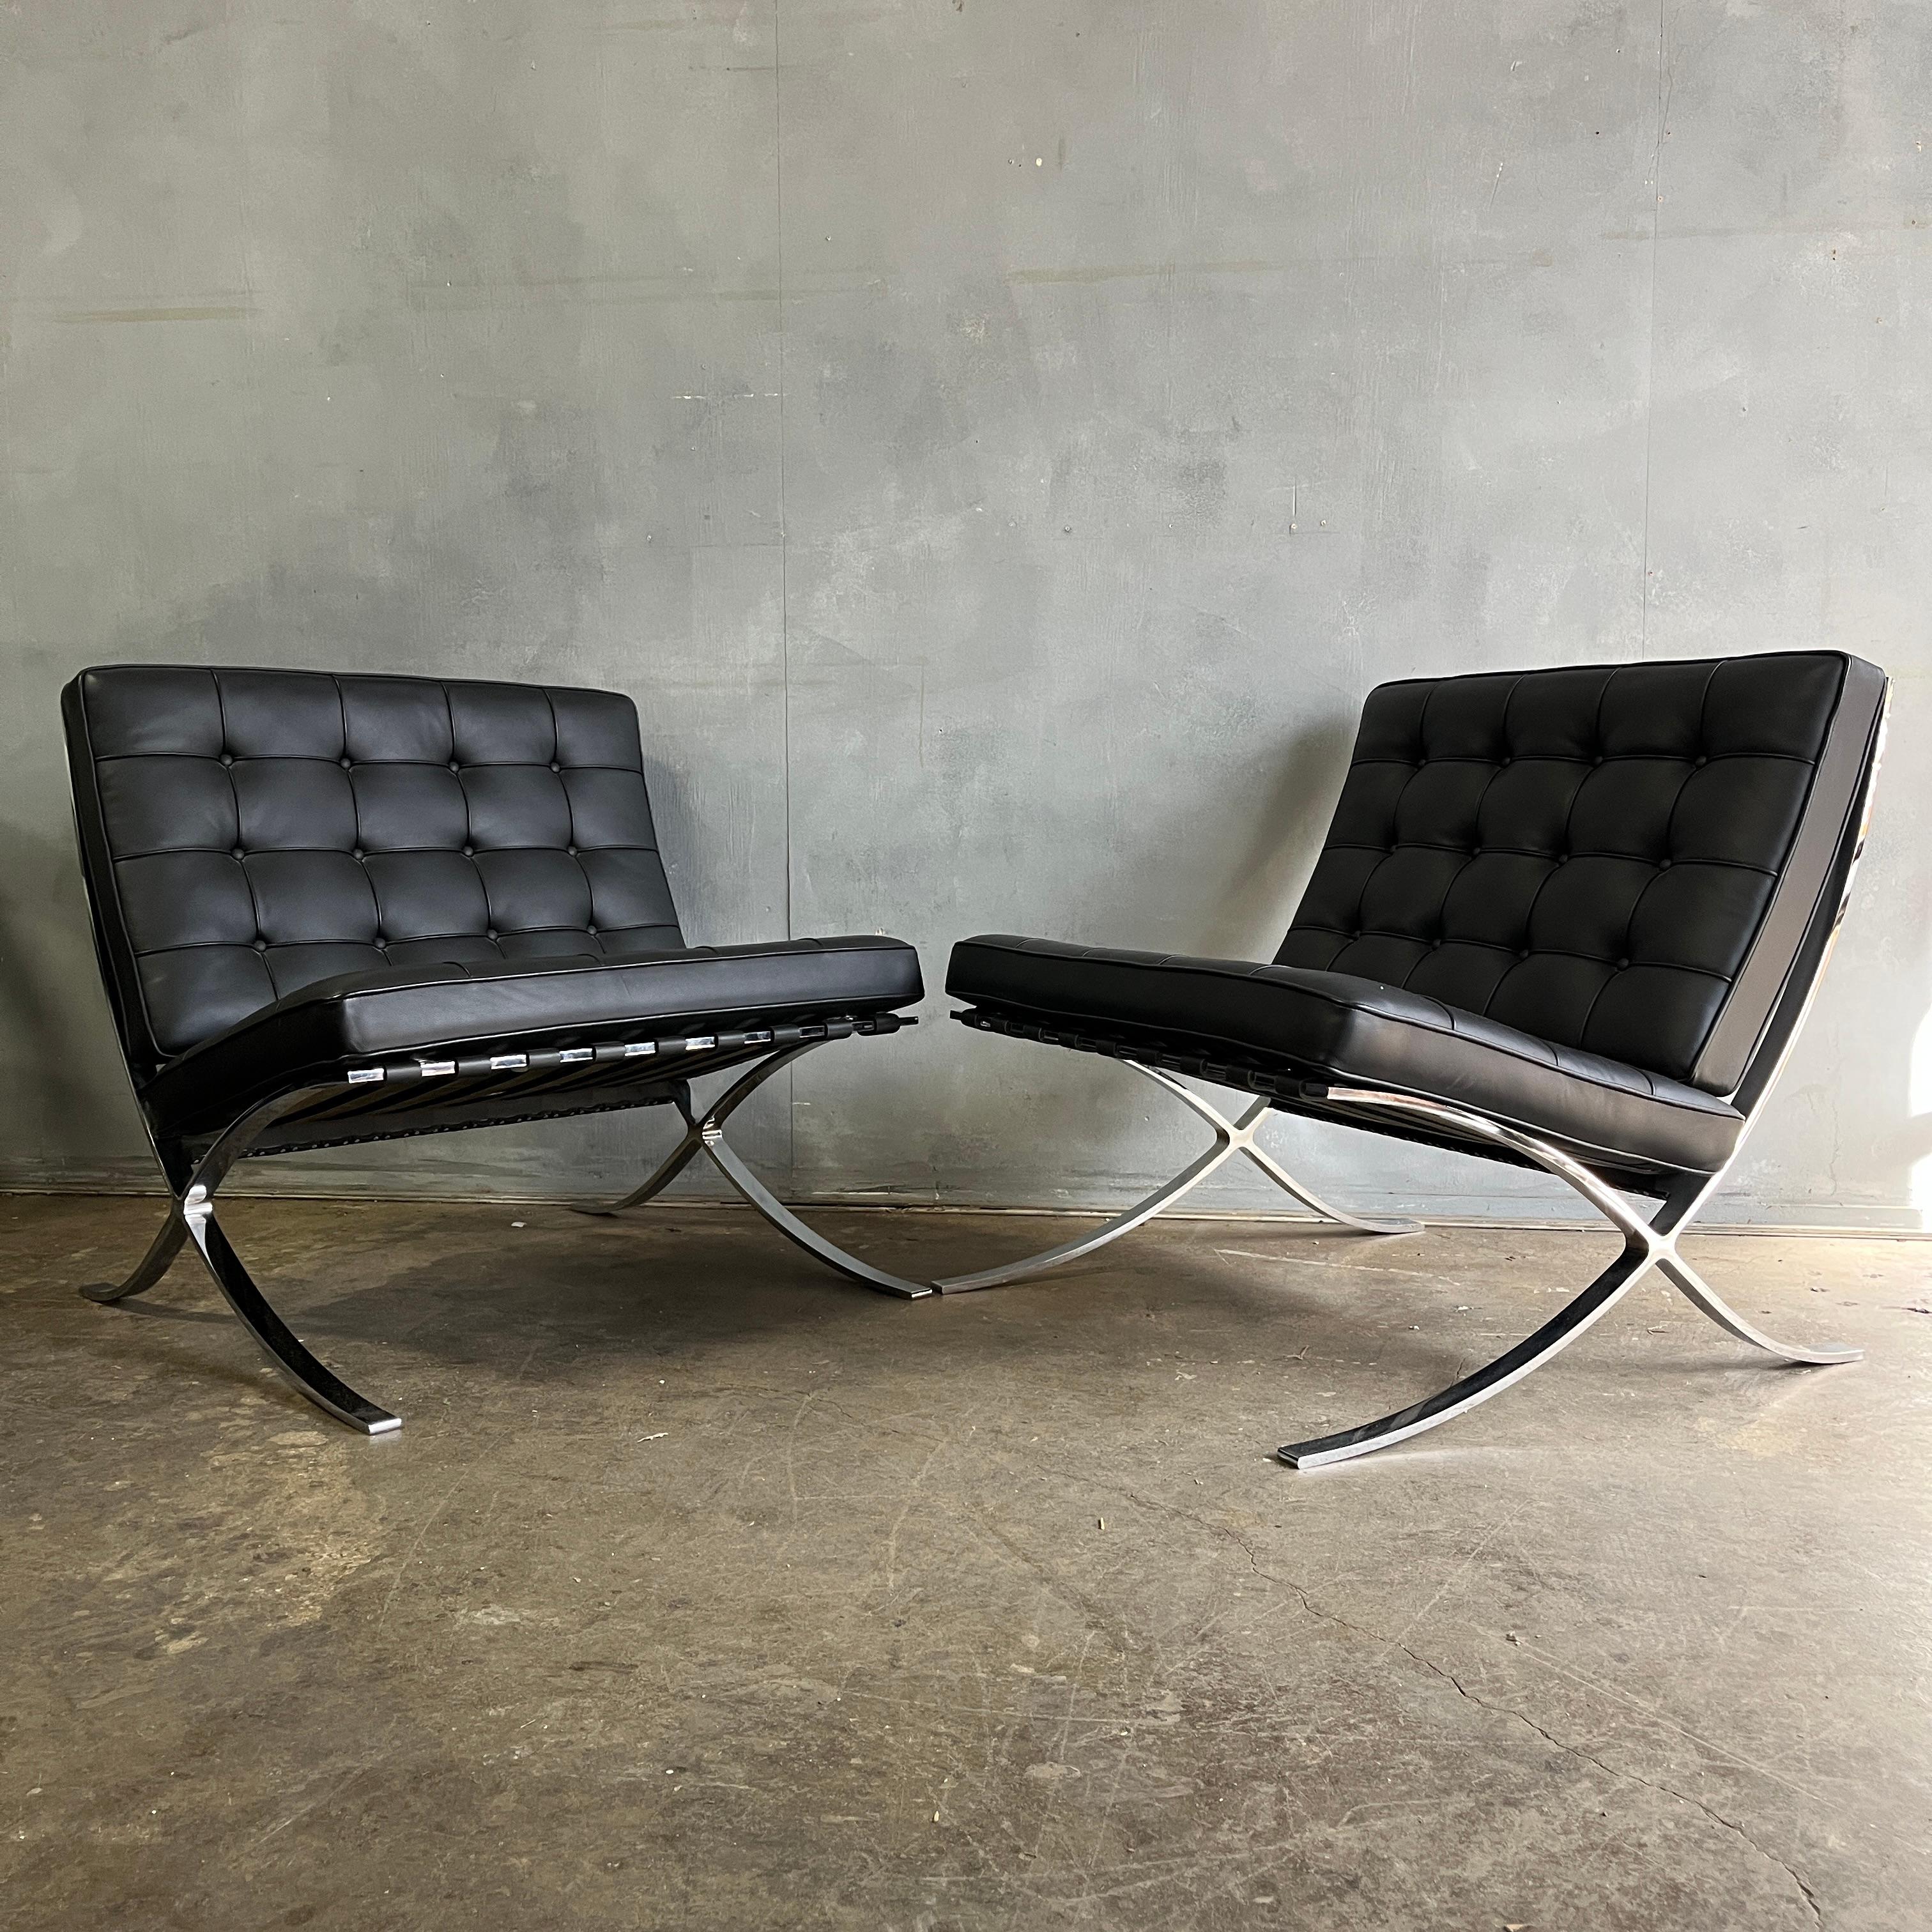 Pair of Barcelona lounge chairs by Ludwig Mies van der Rohe for Knoll in black leather. The frame is stamped KnollStudio / Mies van der Rohe and the cushions are also labeled Knoll. In wonderful near perfect condition showing minimal use. Lounge